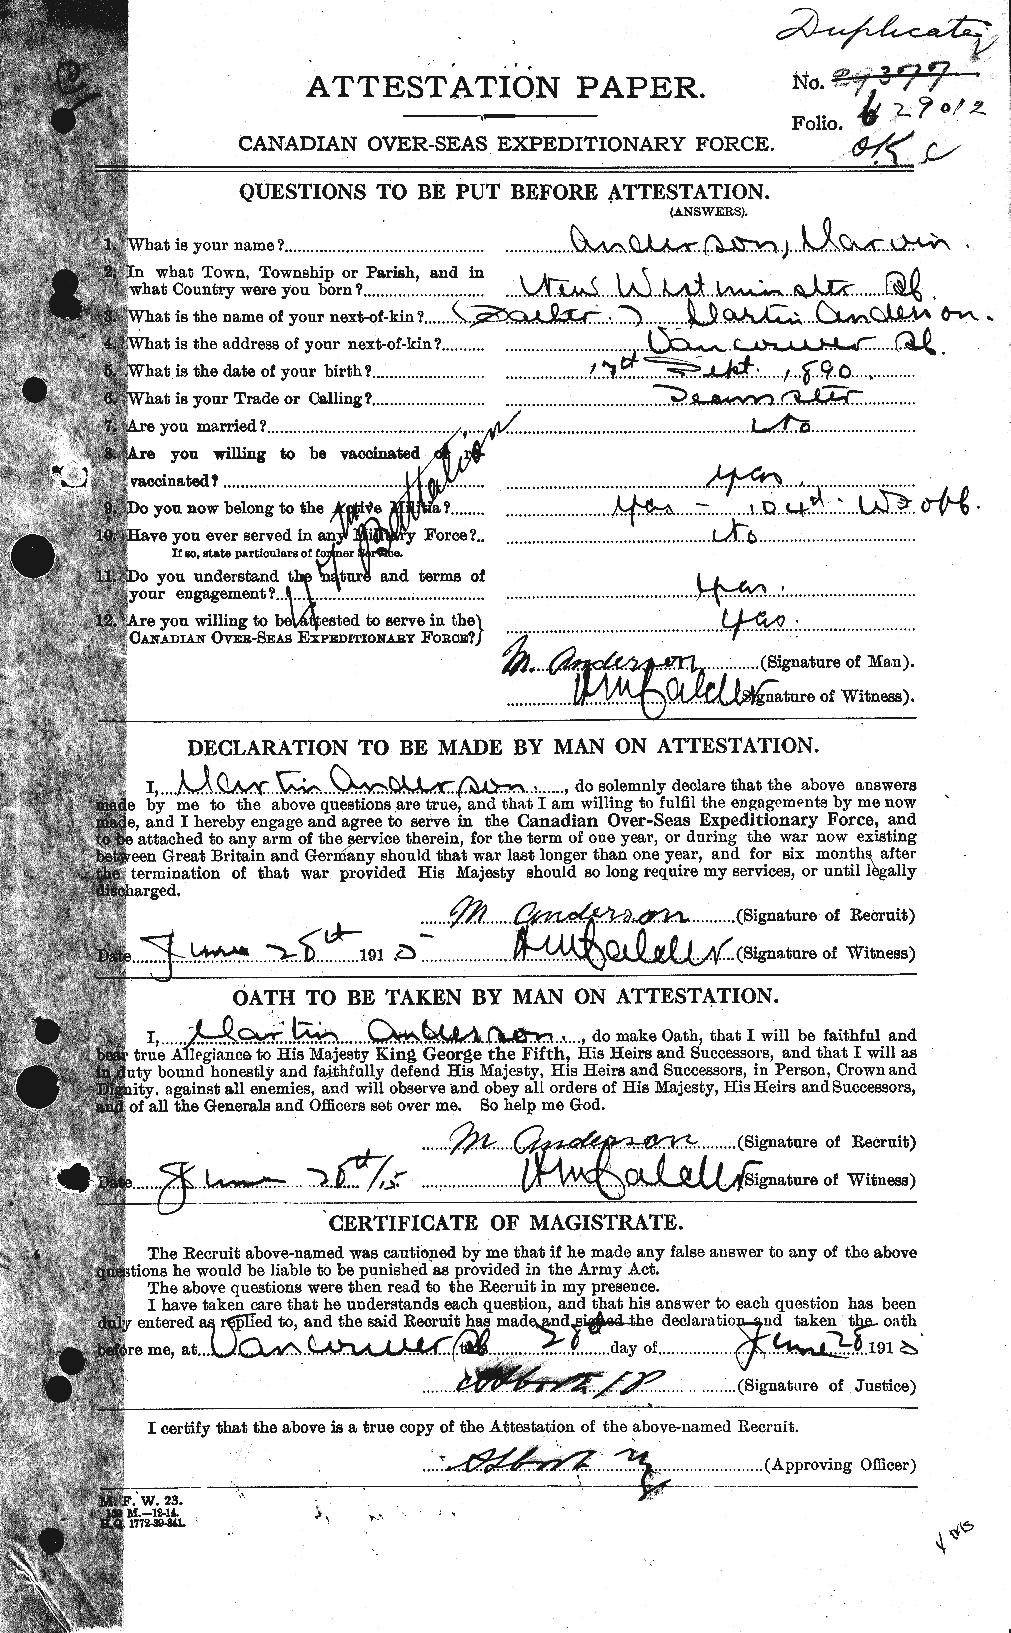 Personnel Records of the First World War - CEF 207473a